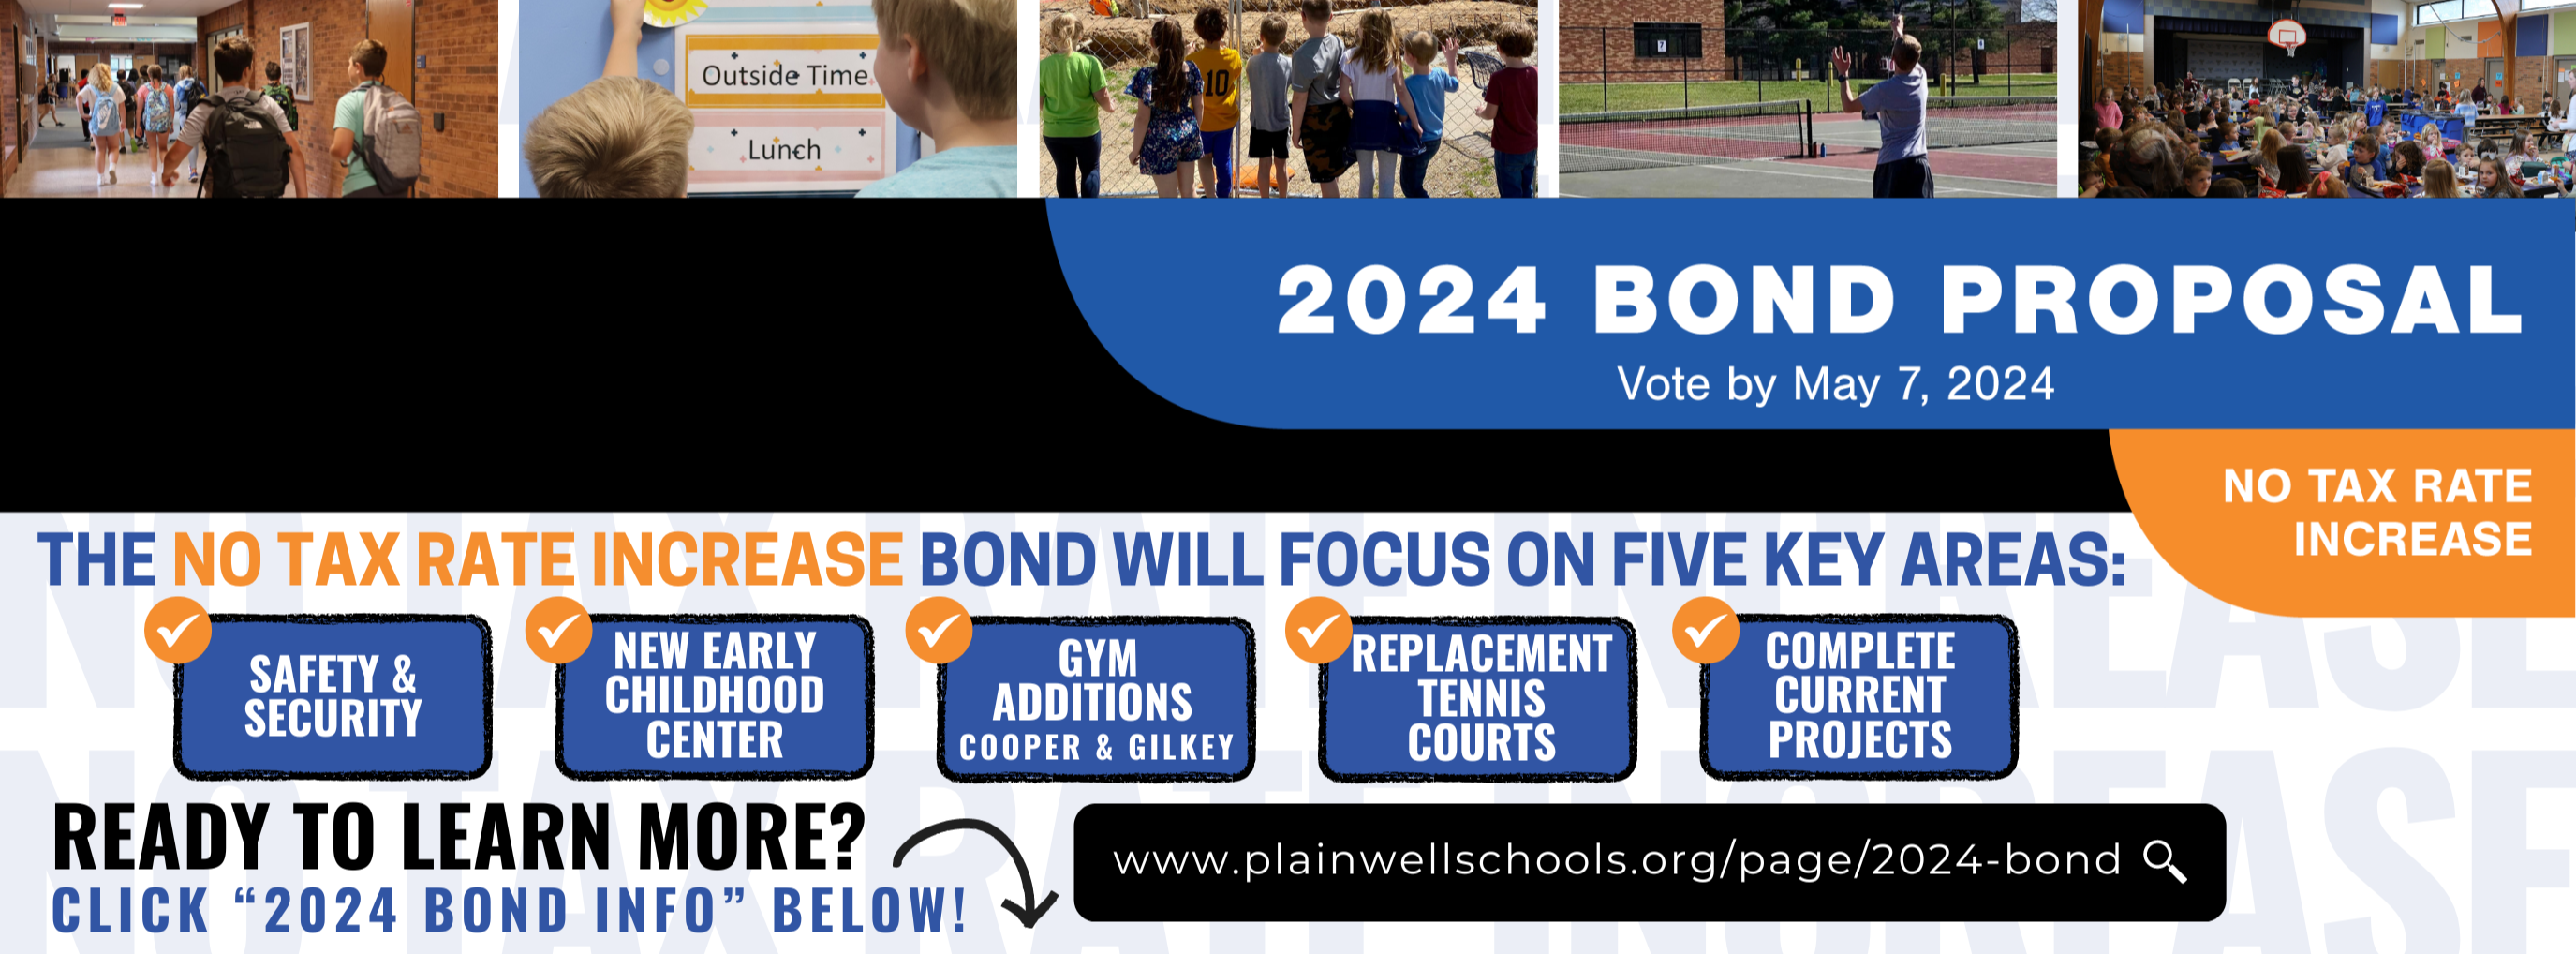 Bond Proposal - Vote May 7, 2024 - No Tax Rate Increase - The No Tax Rate Increase Bond will Focus on Five Key Areas - Safety & Security, New Early Childhood Center, Gym Additions Cooper & Gilkey, Replacement Tennis Courts, Complete Current Projects - Ready to Learn More? Click "2024 Bond Info" Below - www.plainwellschools.org/page/2024-bond